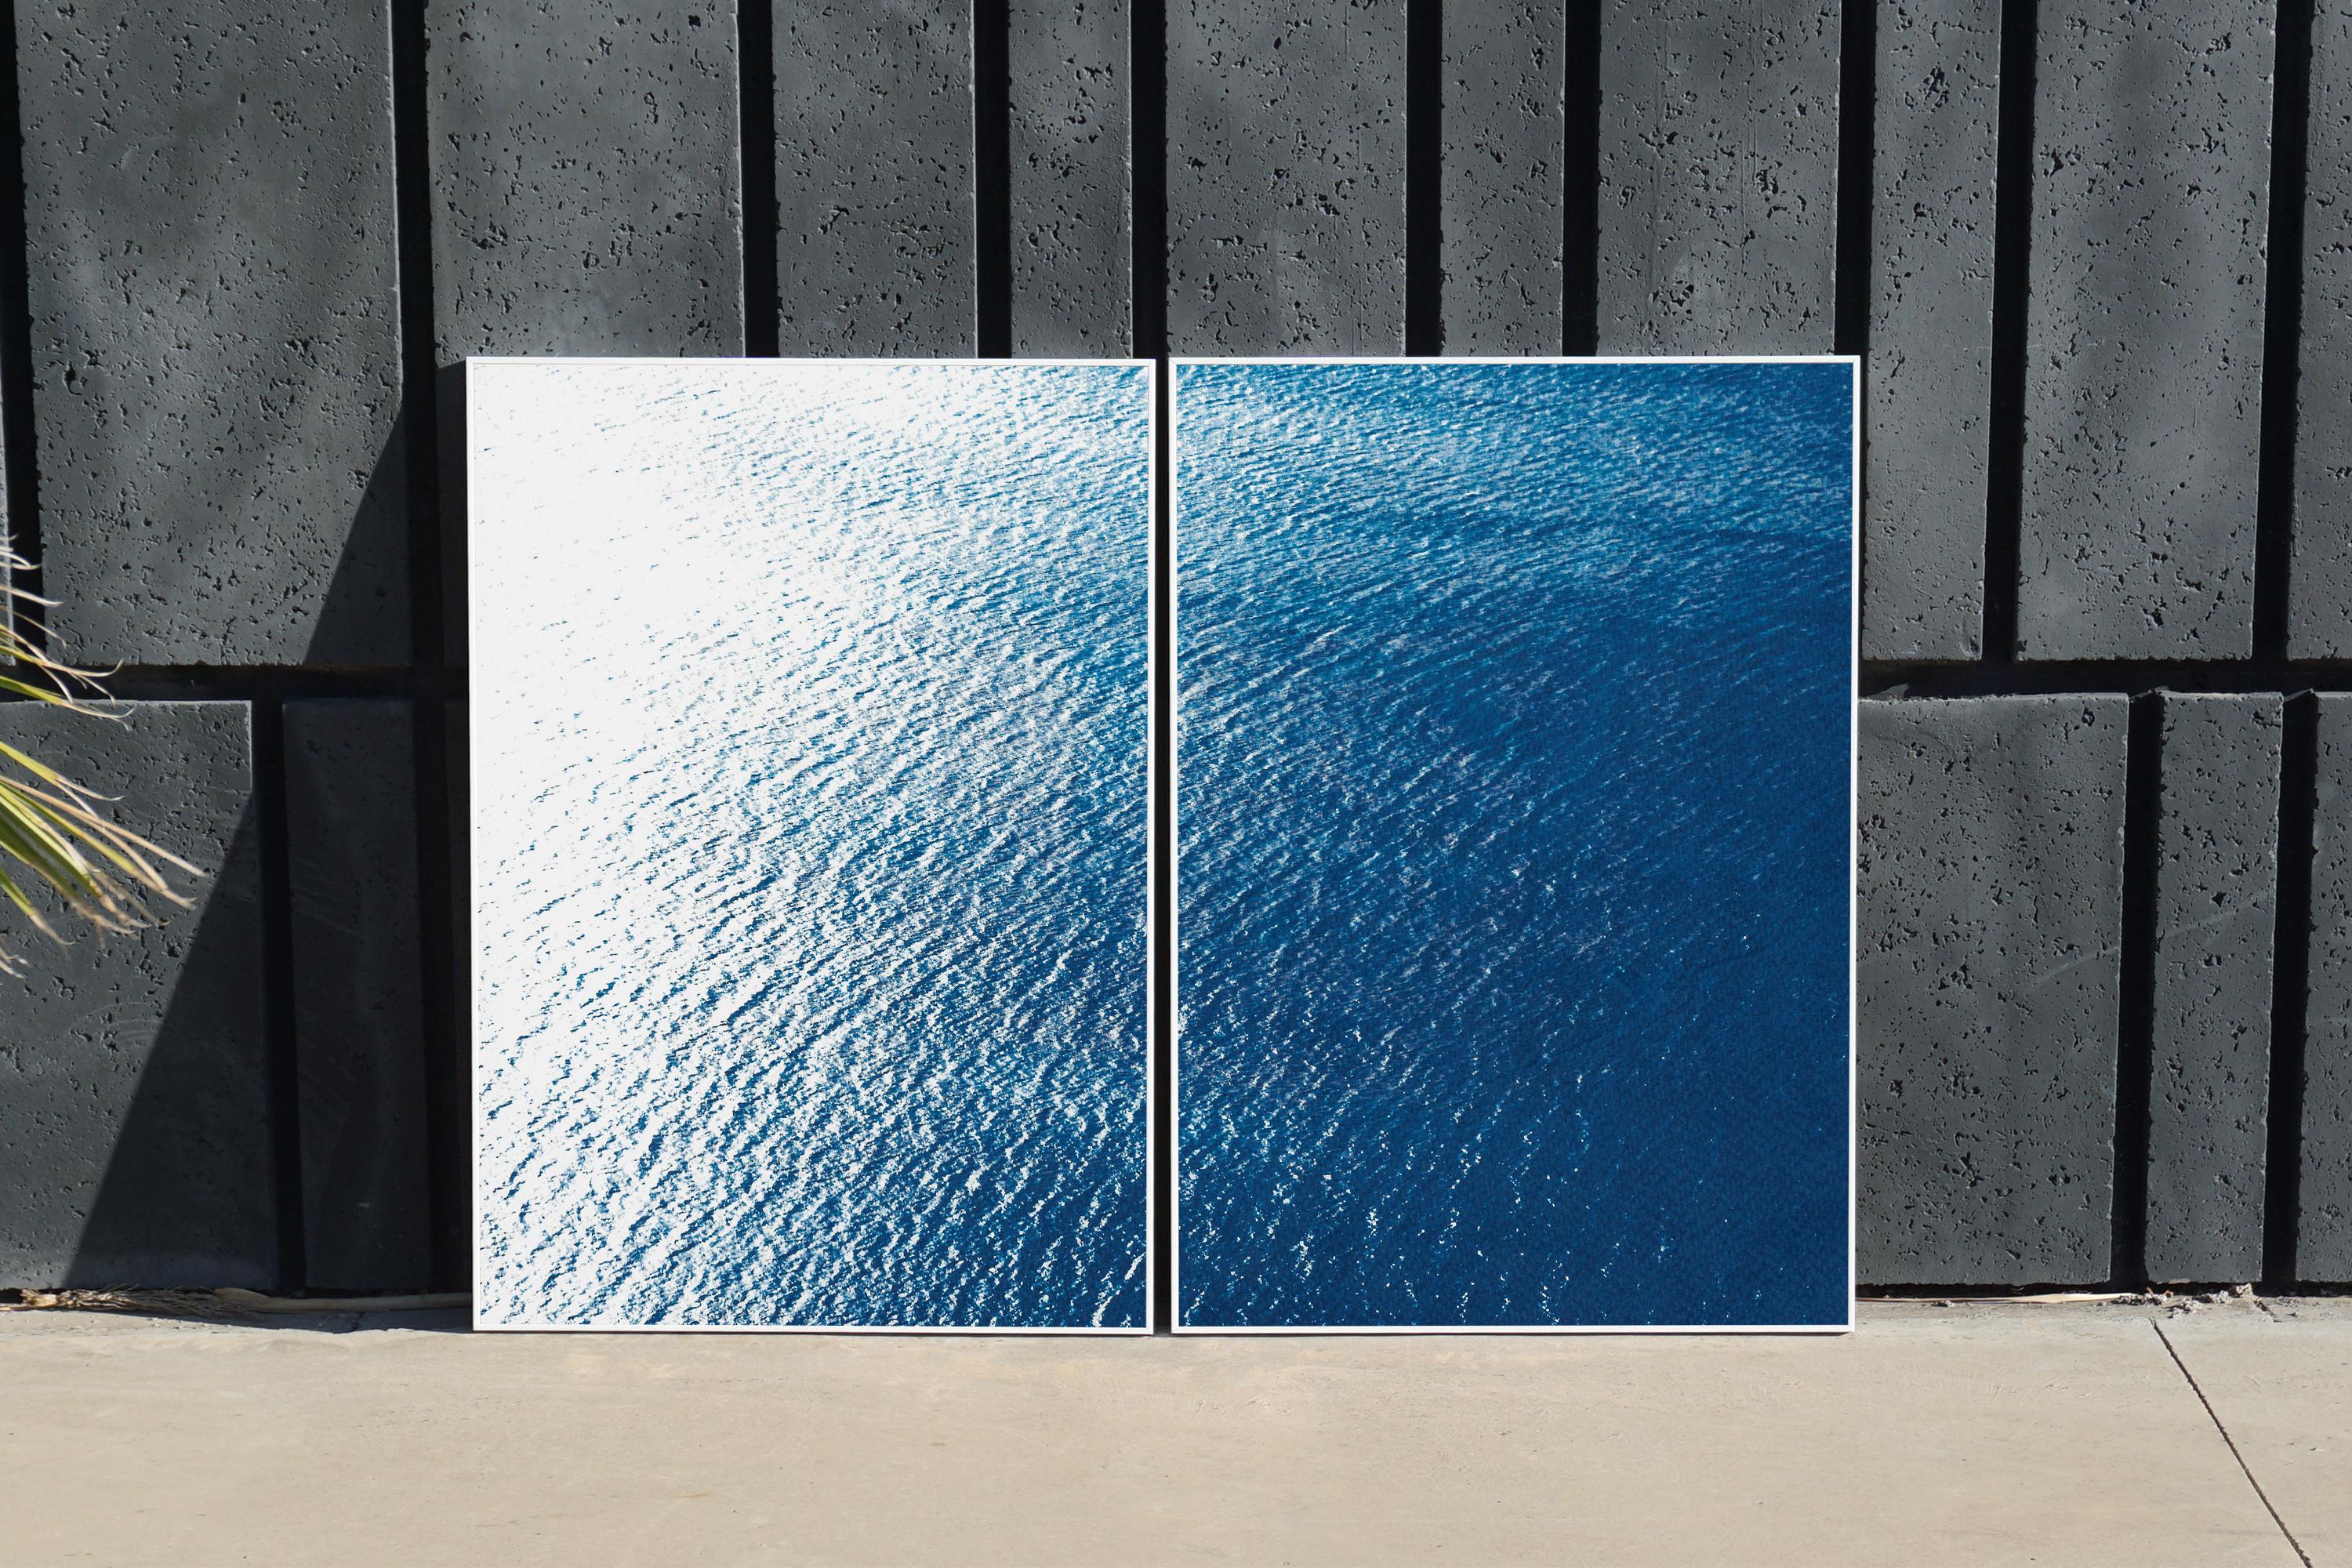 Smooth Bay in the Mediterranean, Classic Blue Diptych, Zen Seascape Coastal Life - Abstract Impressionist Print by Kind of Cyan